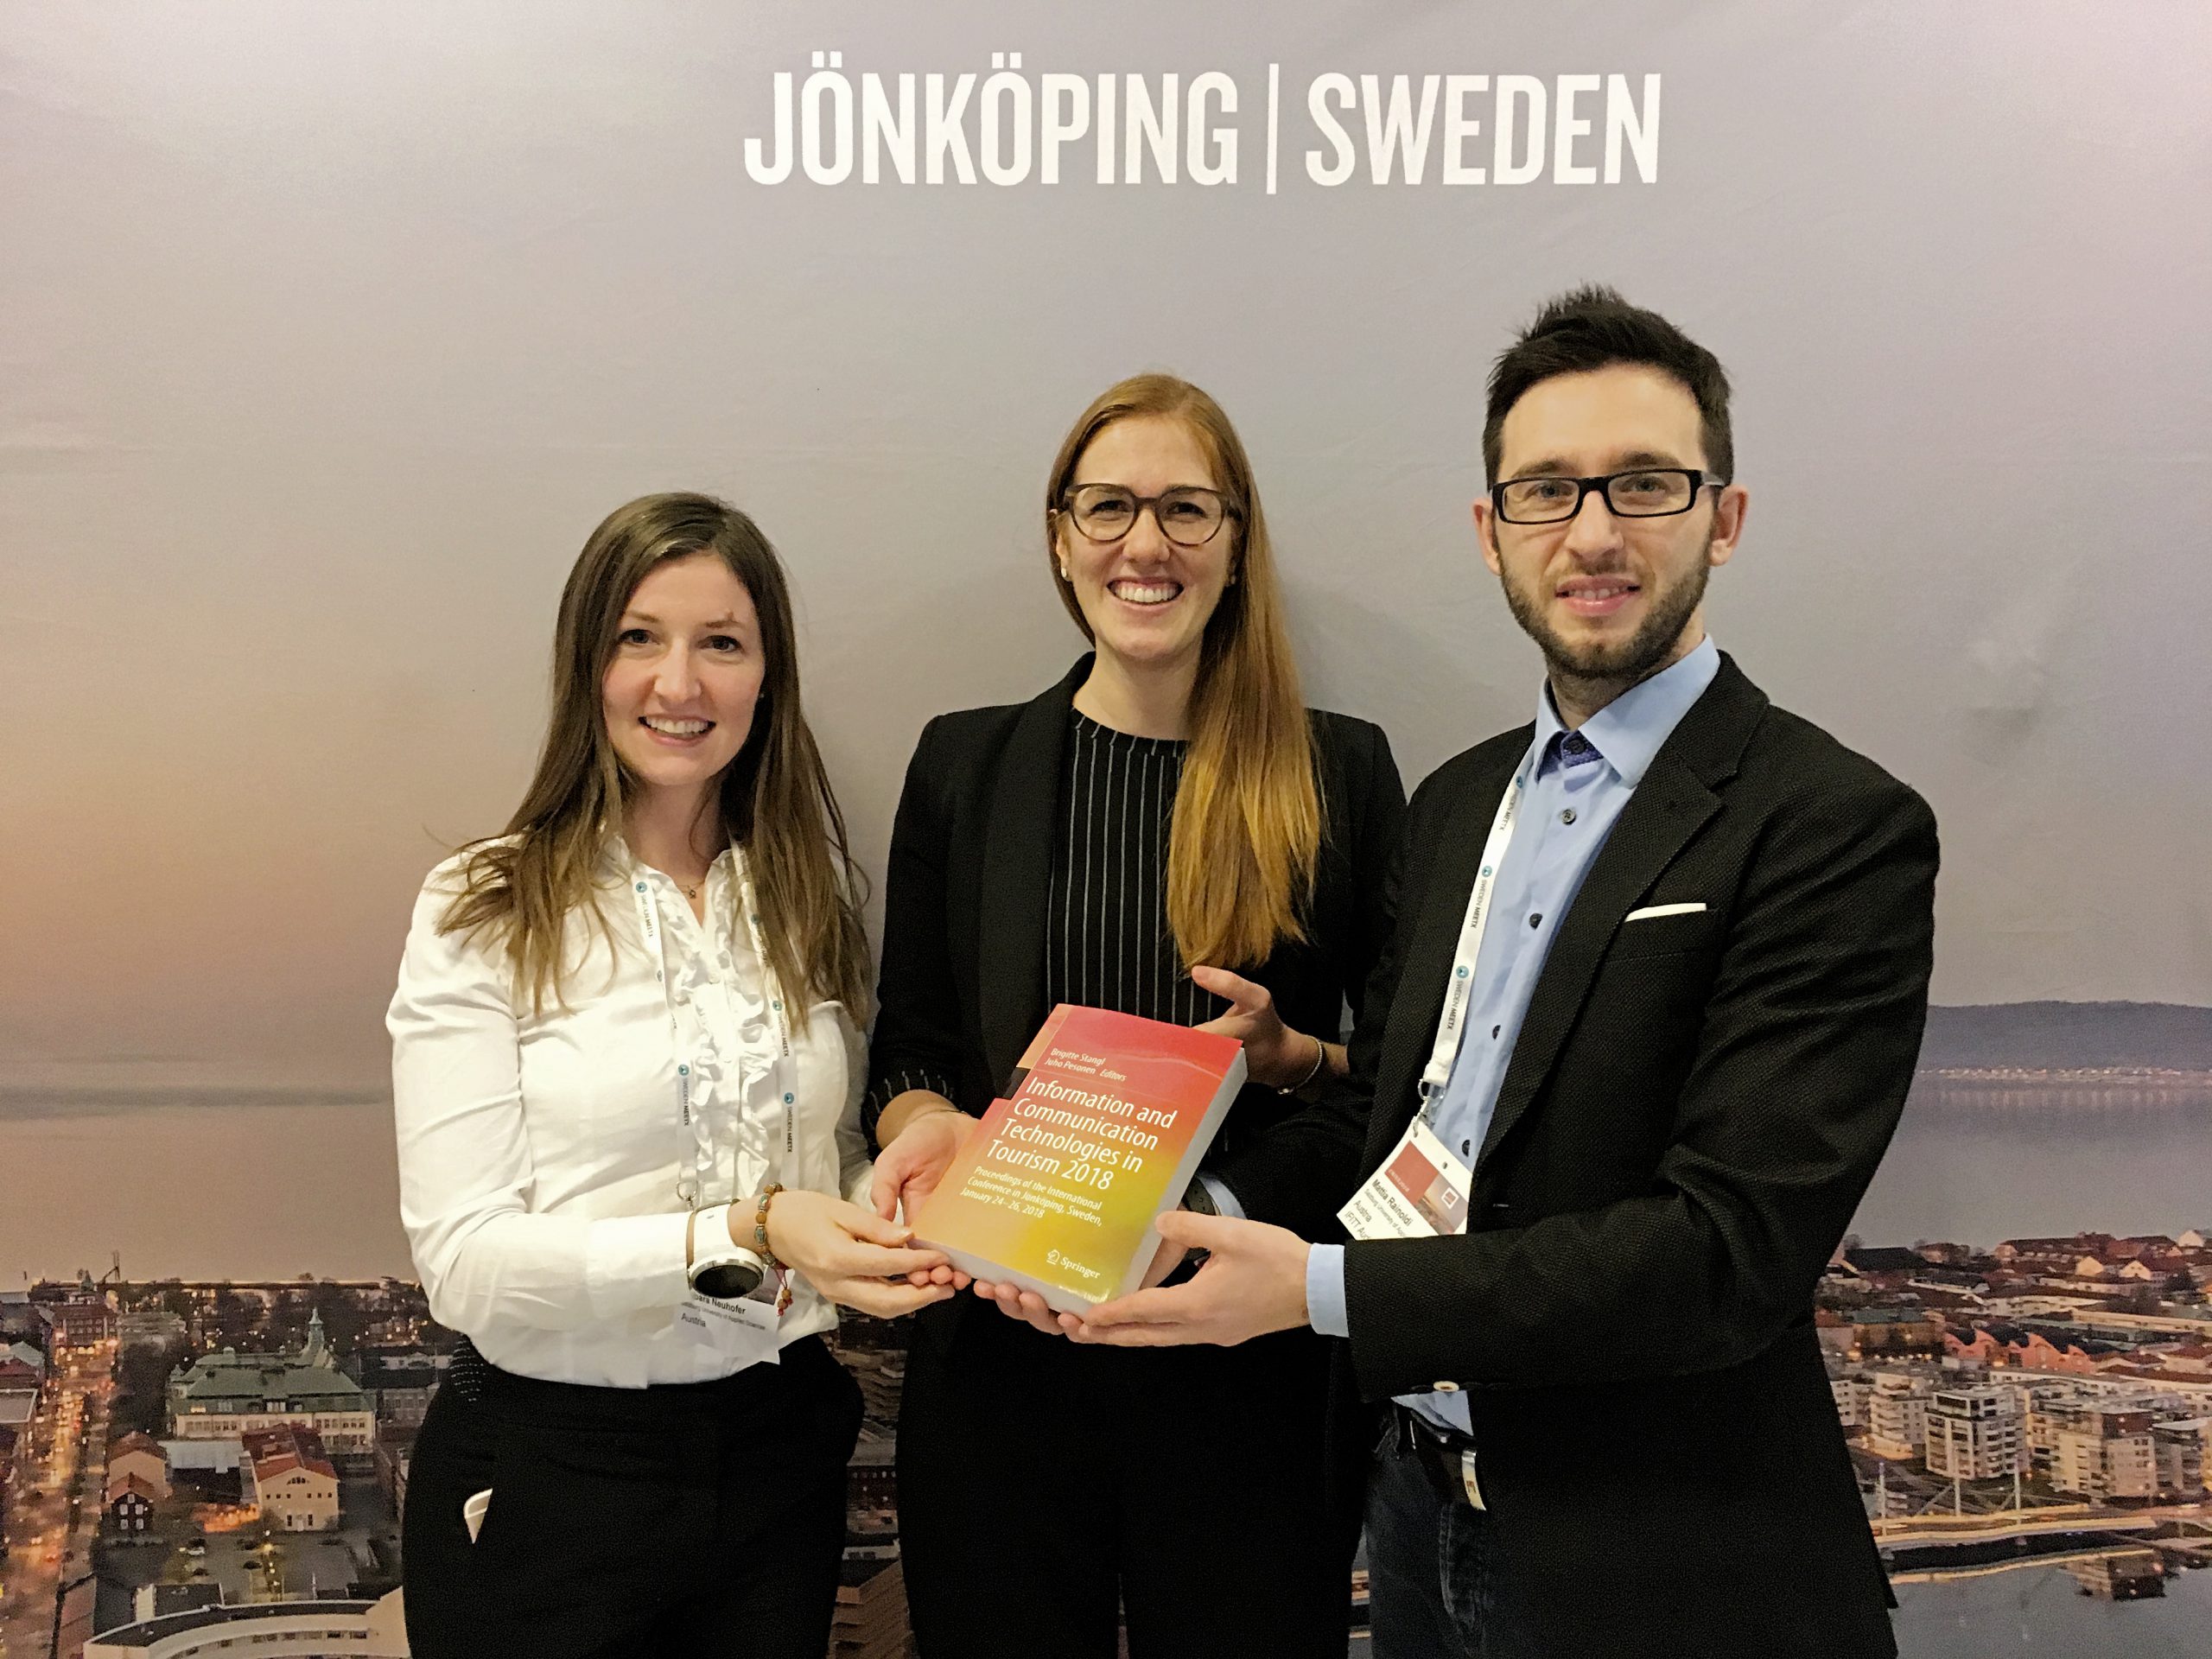 FH Salzburg team presents cutting-edge research at ENTER2018 eTourism Conference